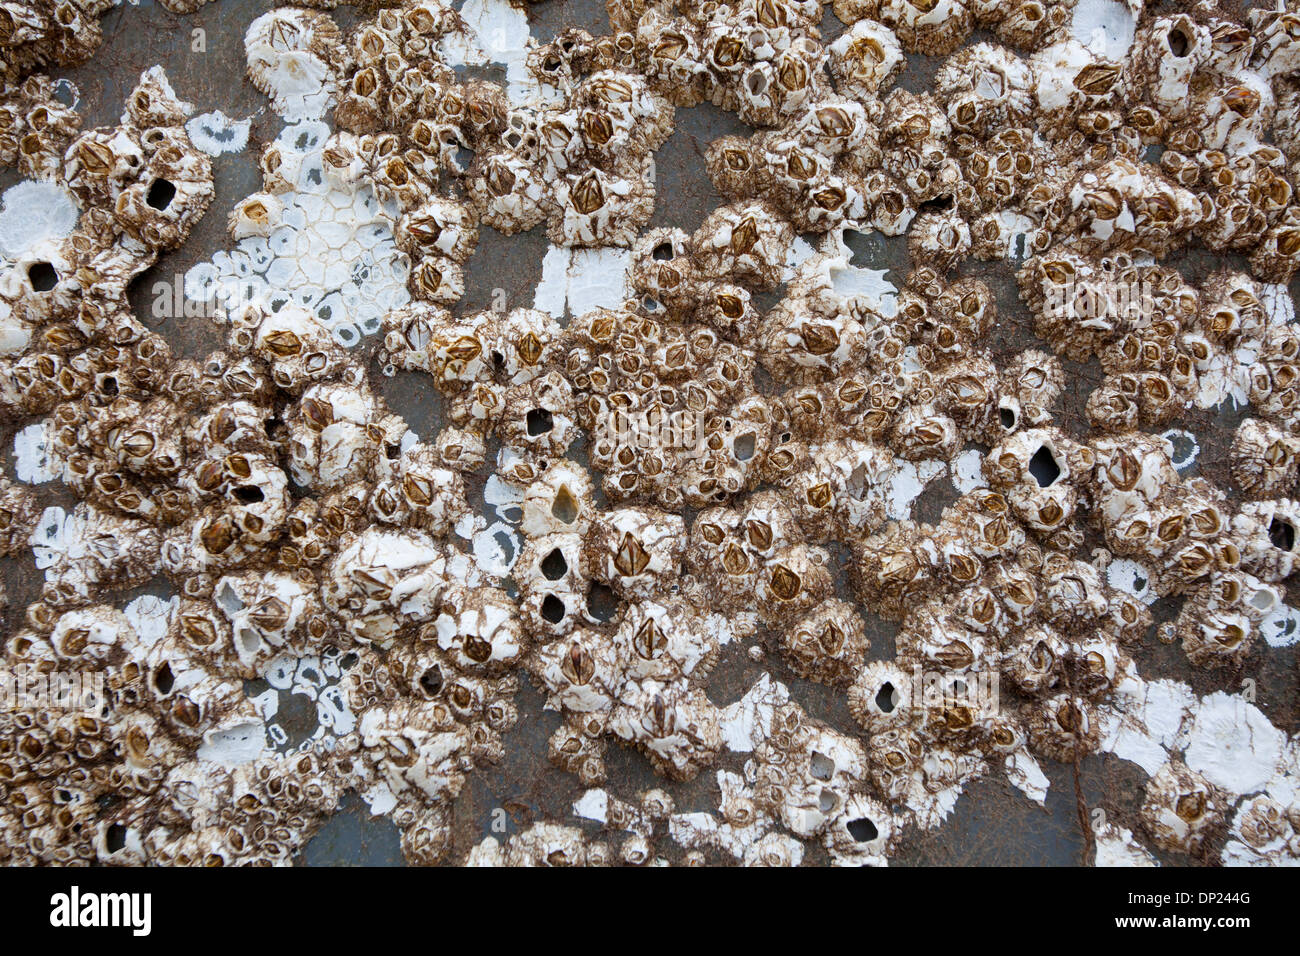 Close up of barnacles encrusted onto rock. Stock Photo